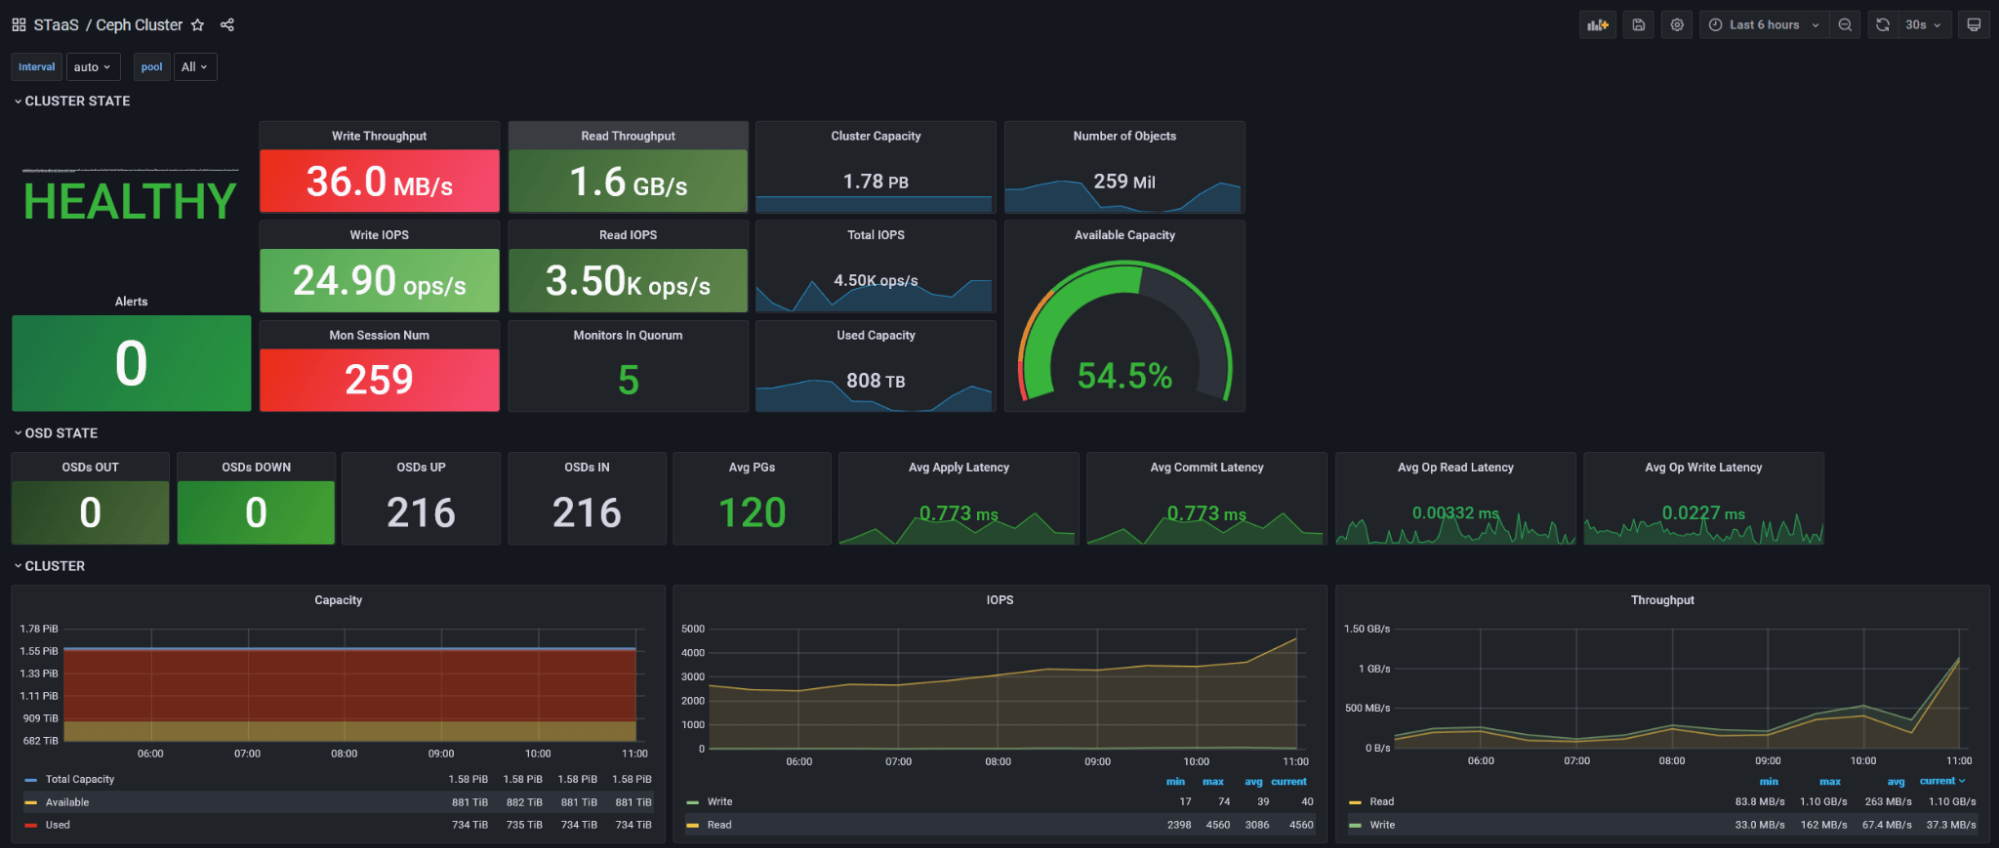 *A Grafana dashboard displays information about the health of one of Adform's clusters.*